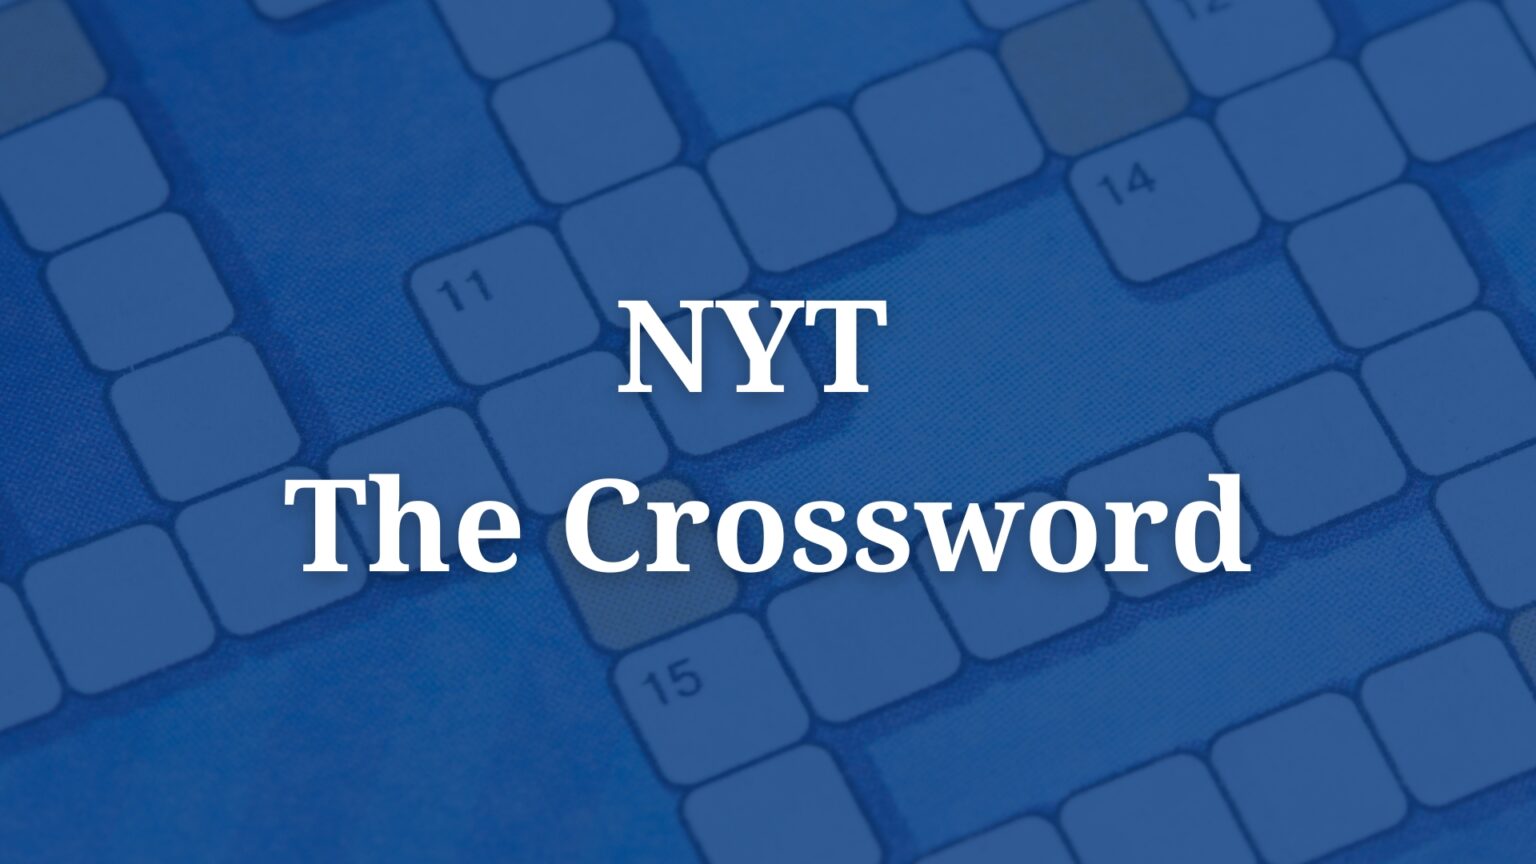 quot Less than hardly quot the NYT Crossword Clue Answer and Hints